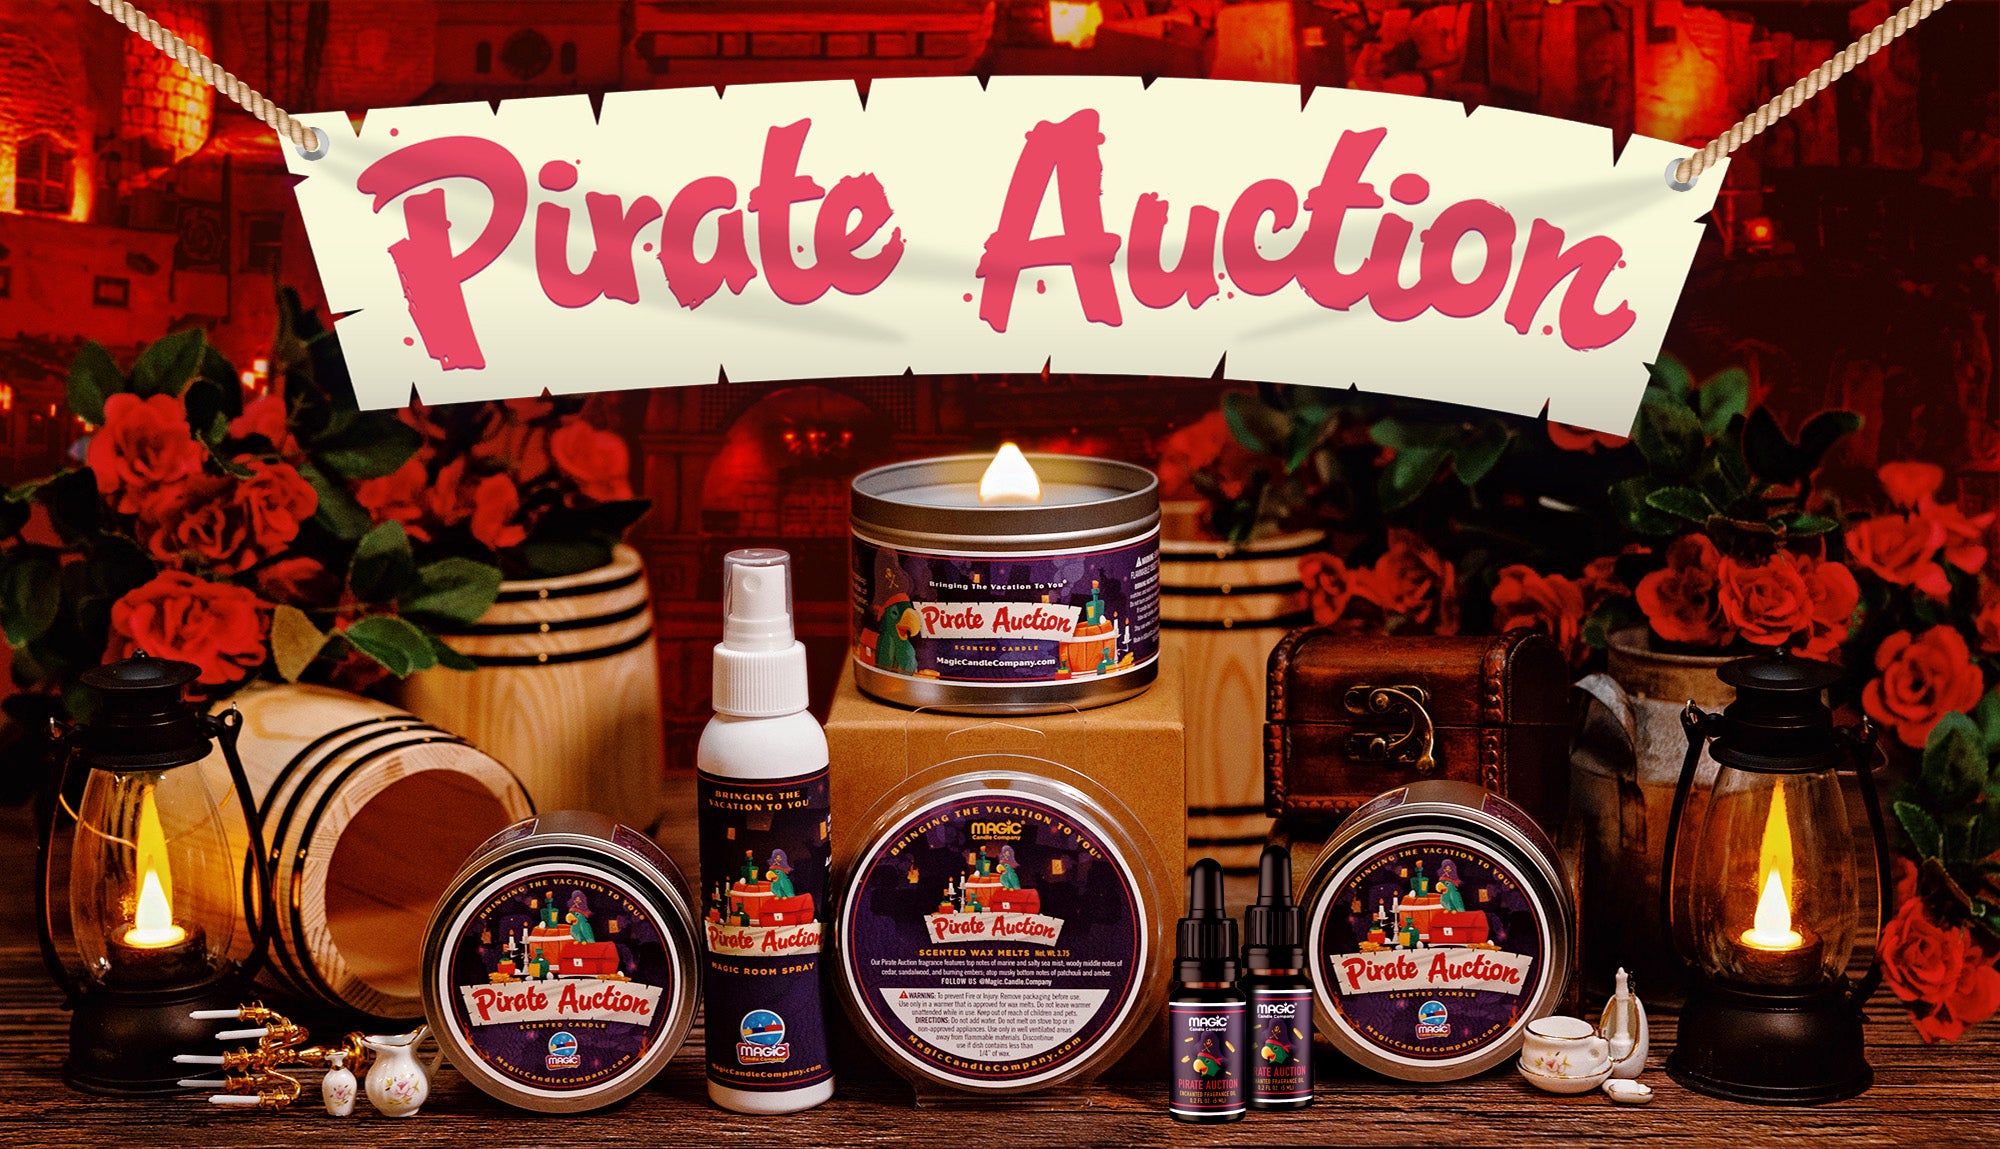 Pirate Auction Fragrance